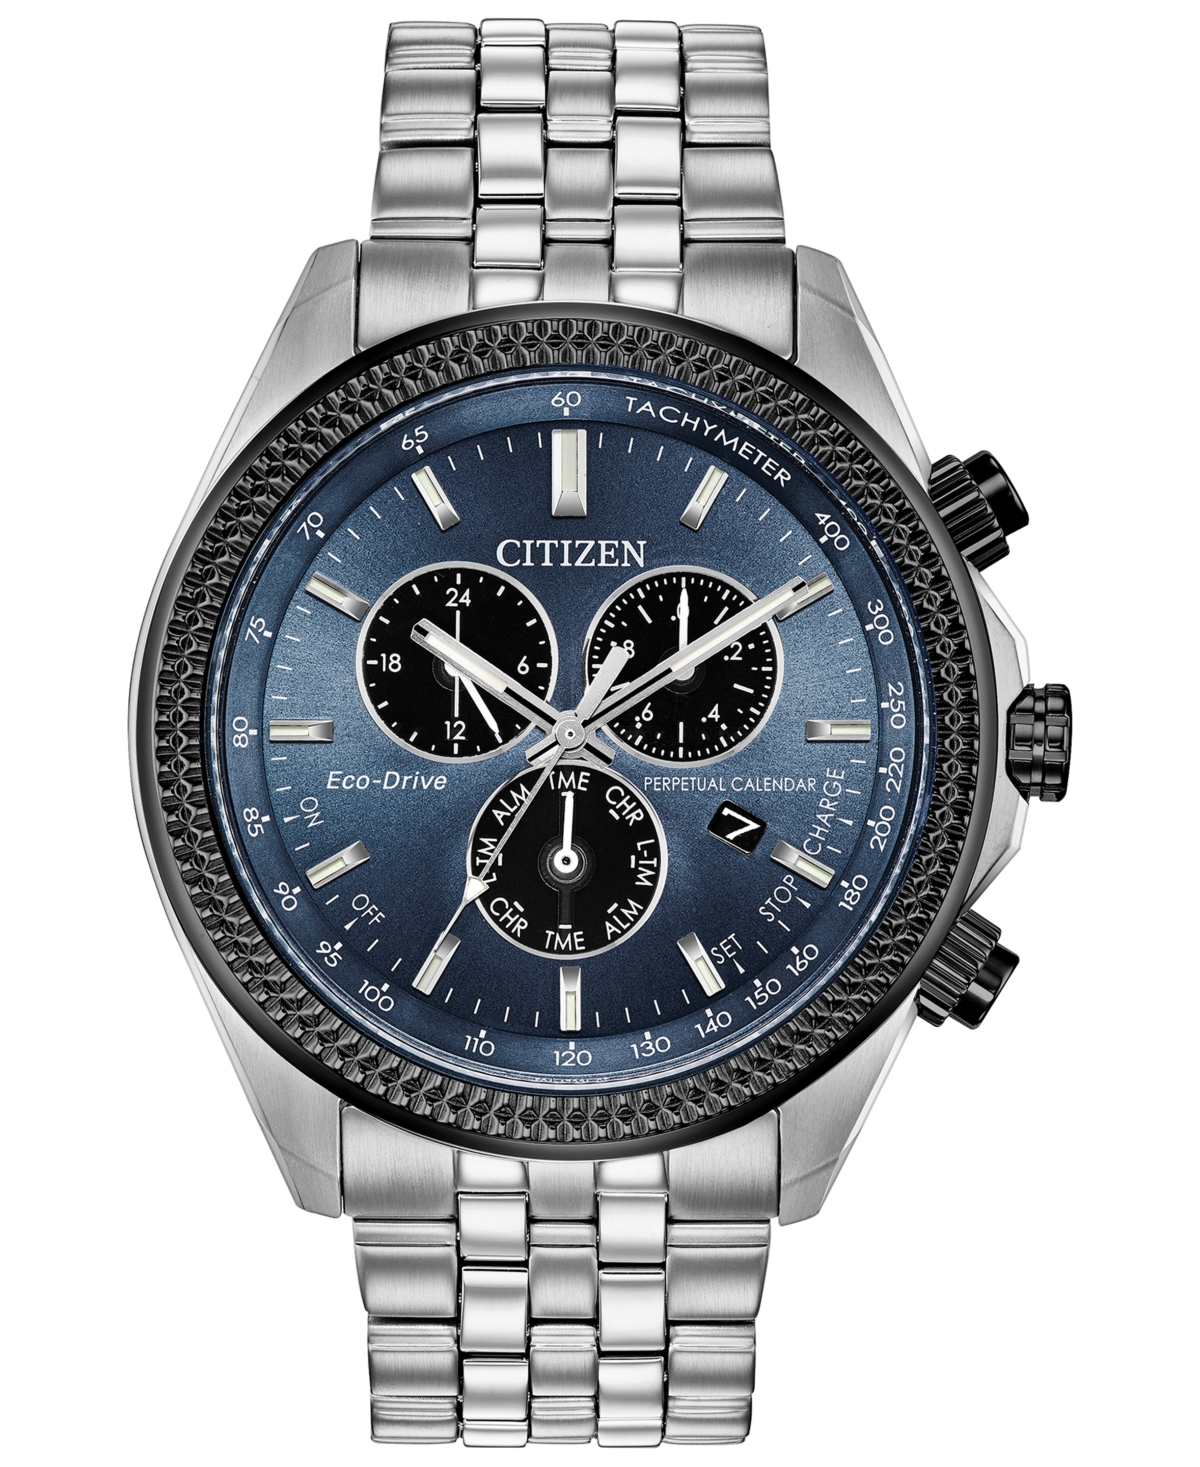 Citizen Eco-Drive Men's Chronograph Brycen Stainless Steel Bracelet Watch  44mm & Reviews - All Watches - Jewelry & Watches - Macy's